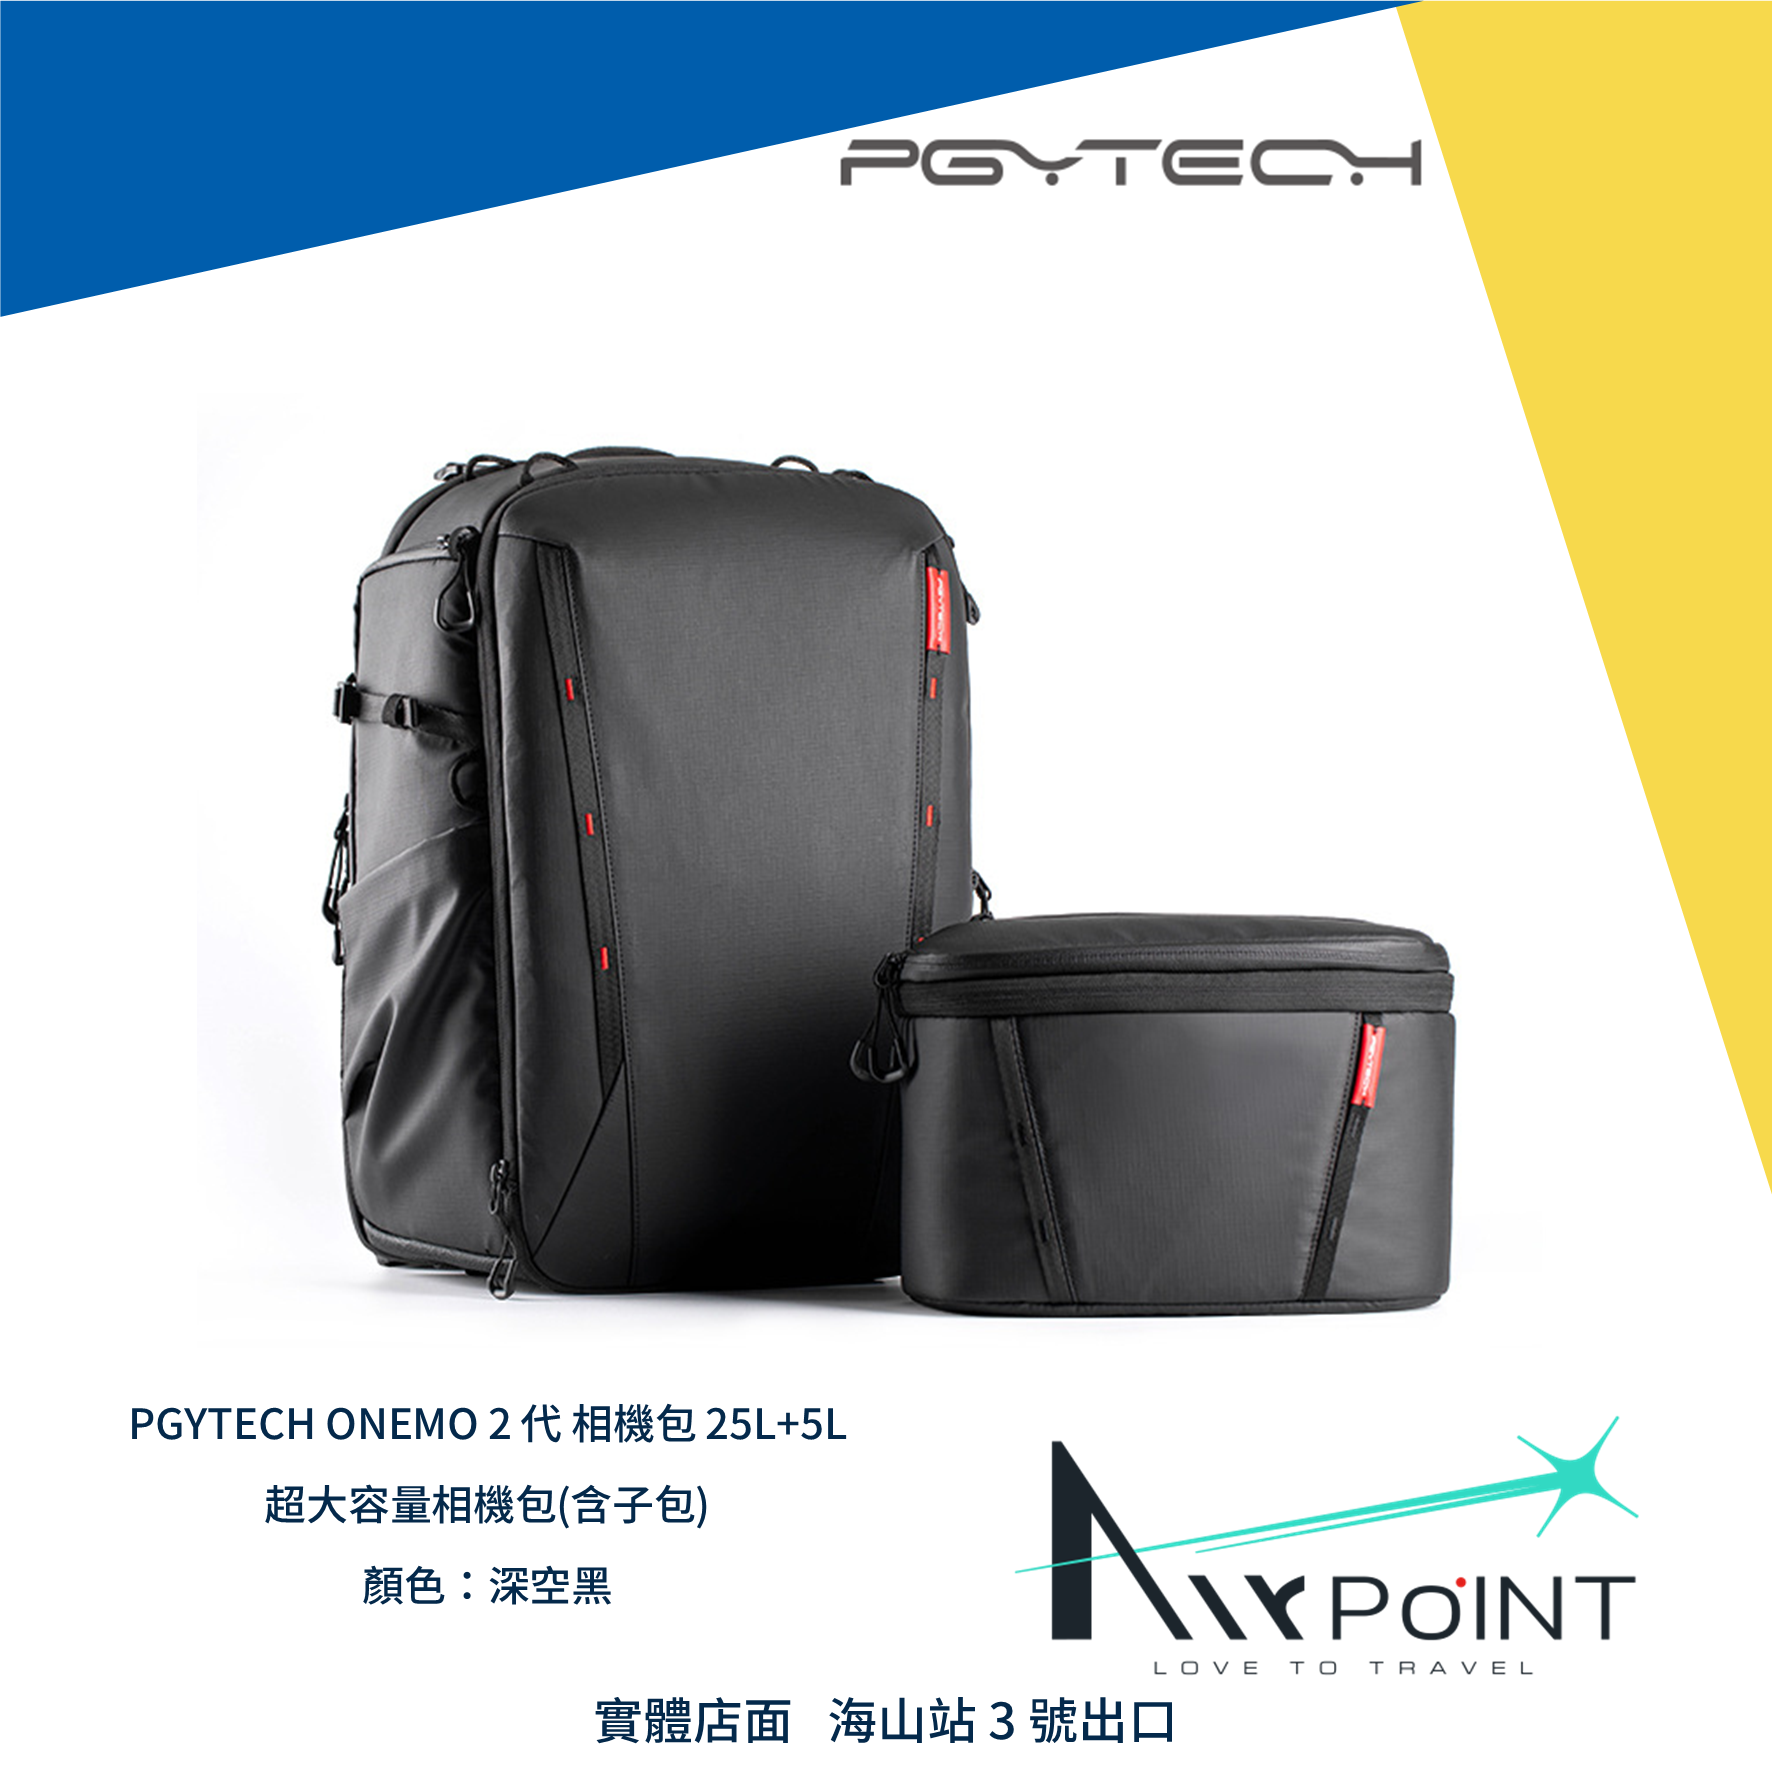 AirPoint】【PGYTECH】ONEMO 2代相機包雙肩背包ONE MO PGY 蒲公英科技